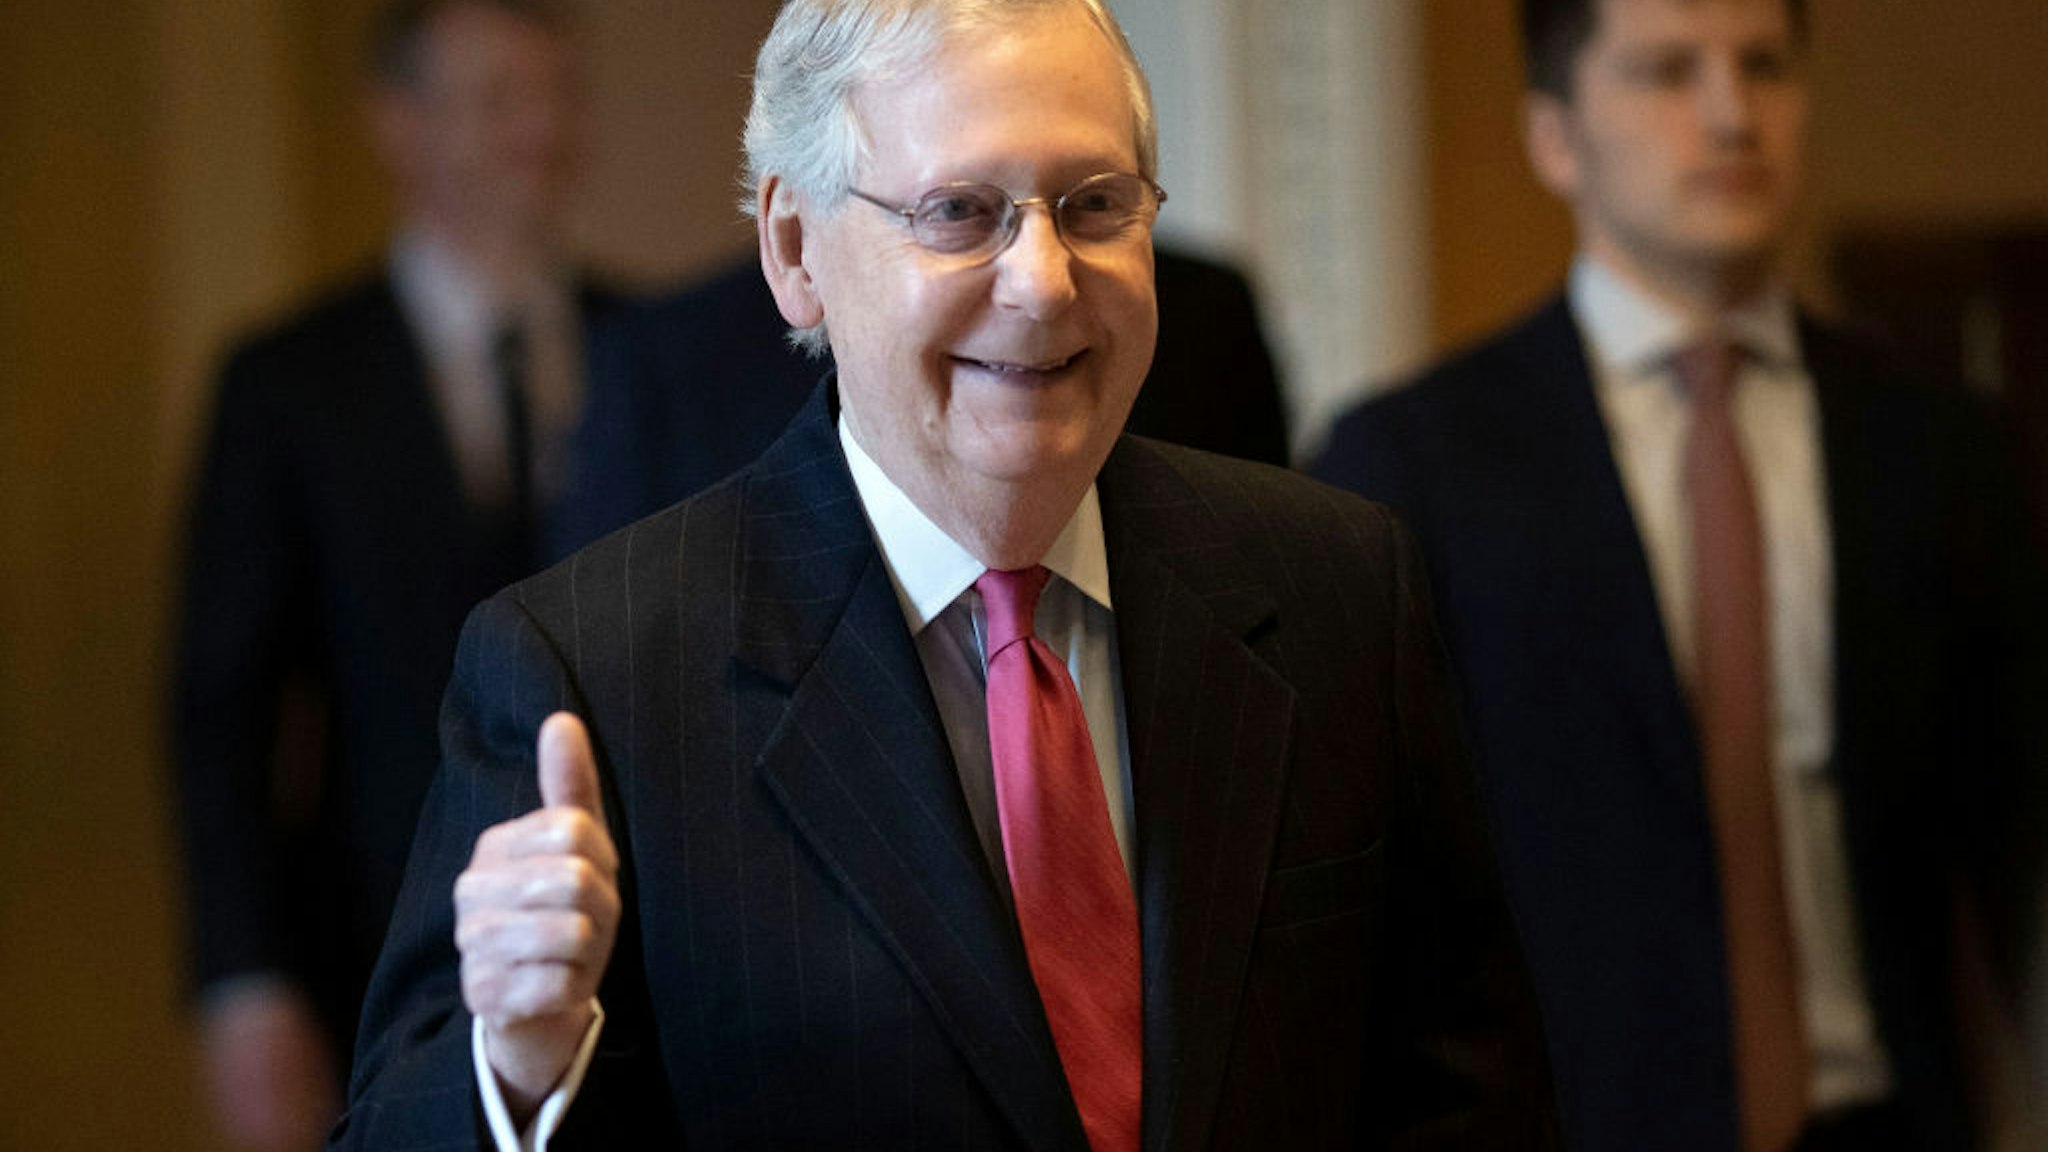 U.S. Senate Majority Leader Mitch McConnell (R-KY) gives a thumbs up sign after speaking on the floor of the U.S. Senate on March 25, 2020 in Washington, DC.